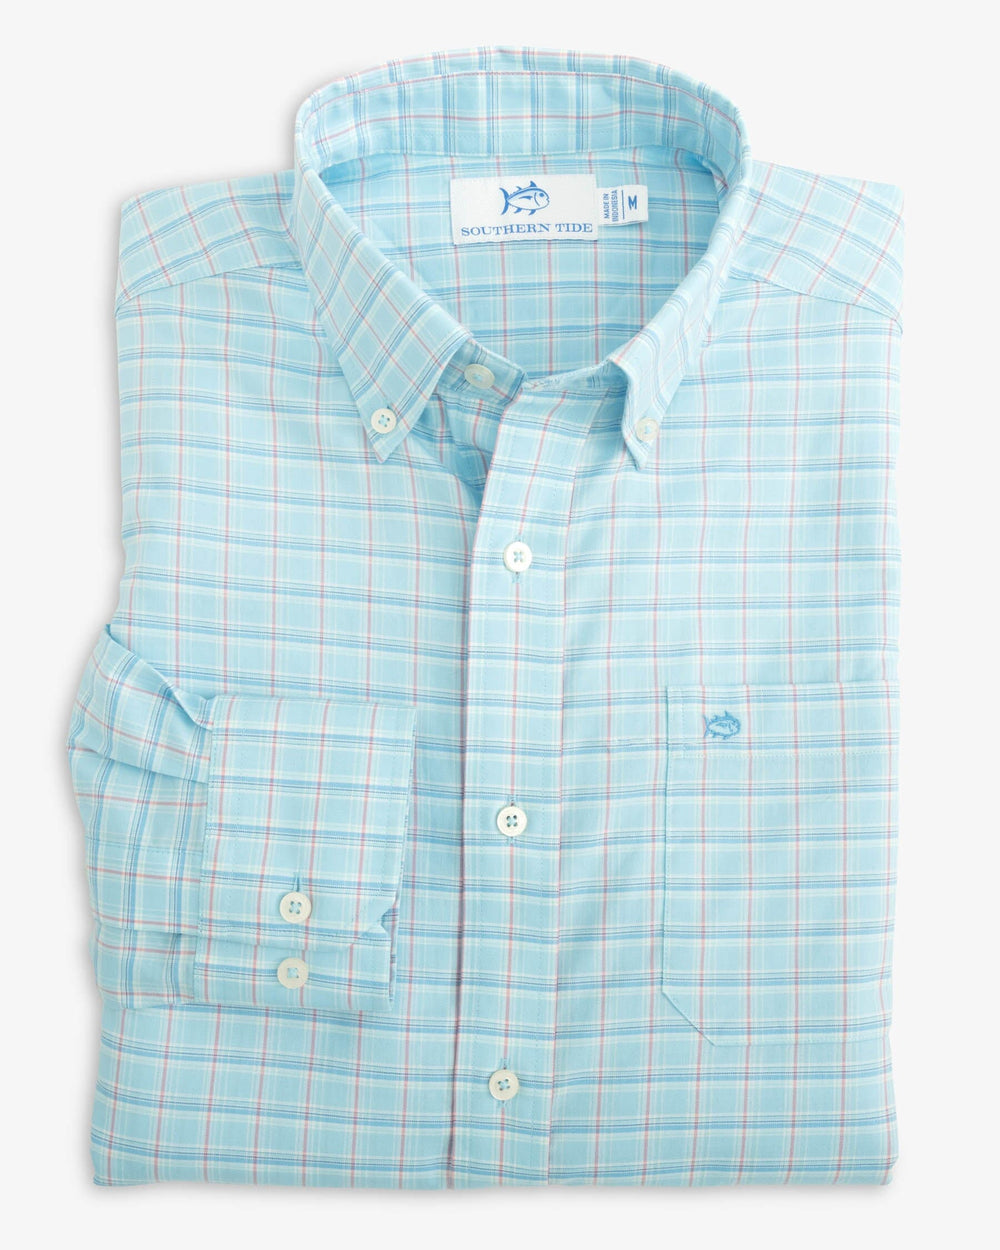 The folded view of the Skipjack Winton Plaid Sport Shirt by Southern Tide - Rain Water